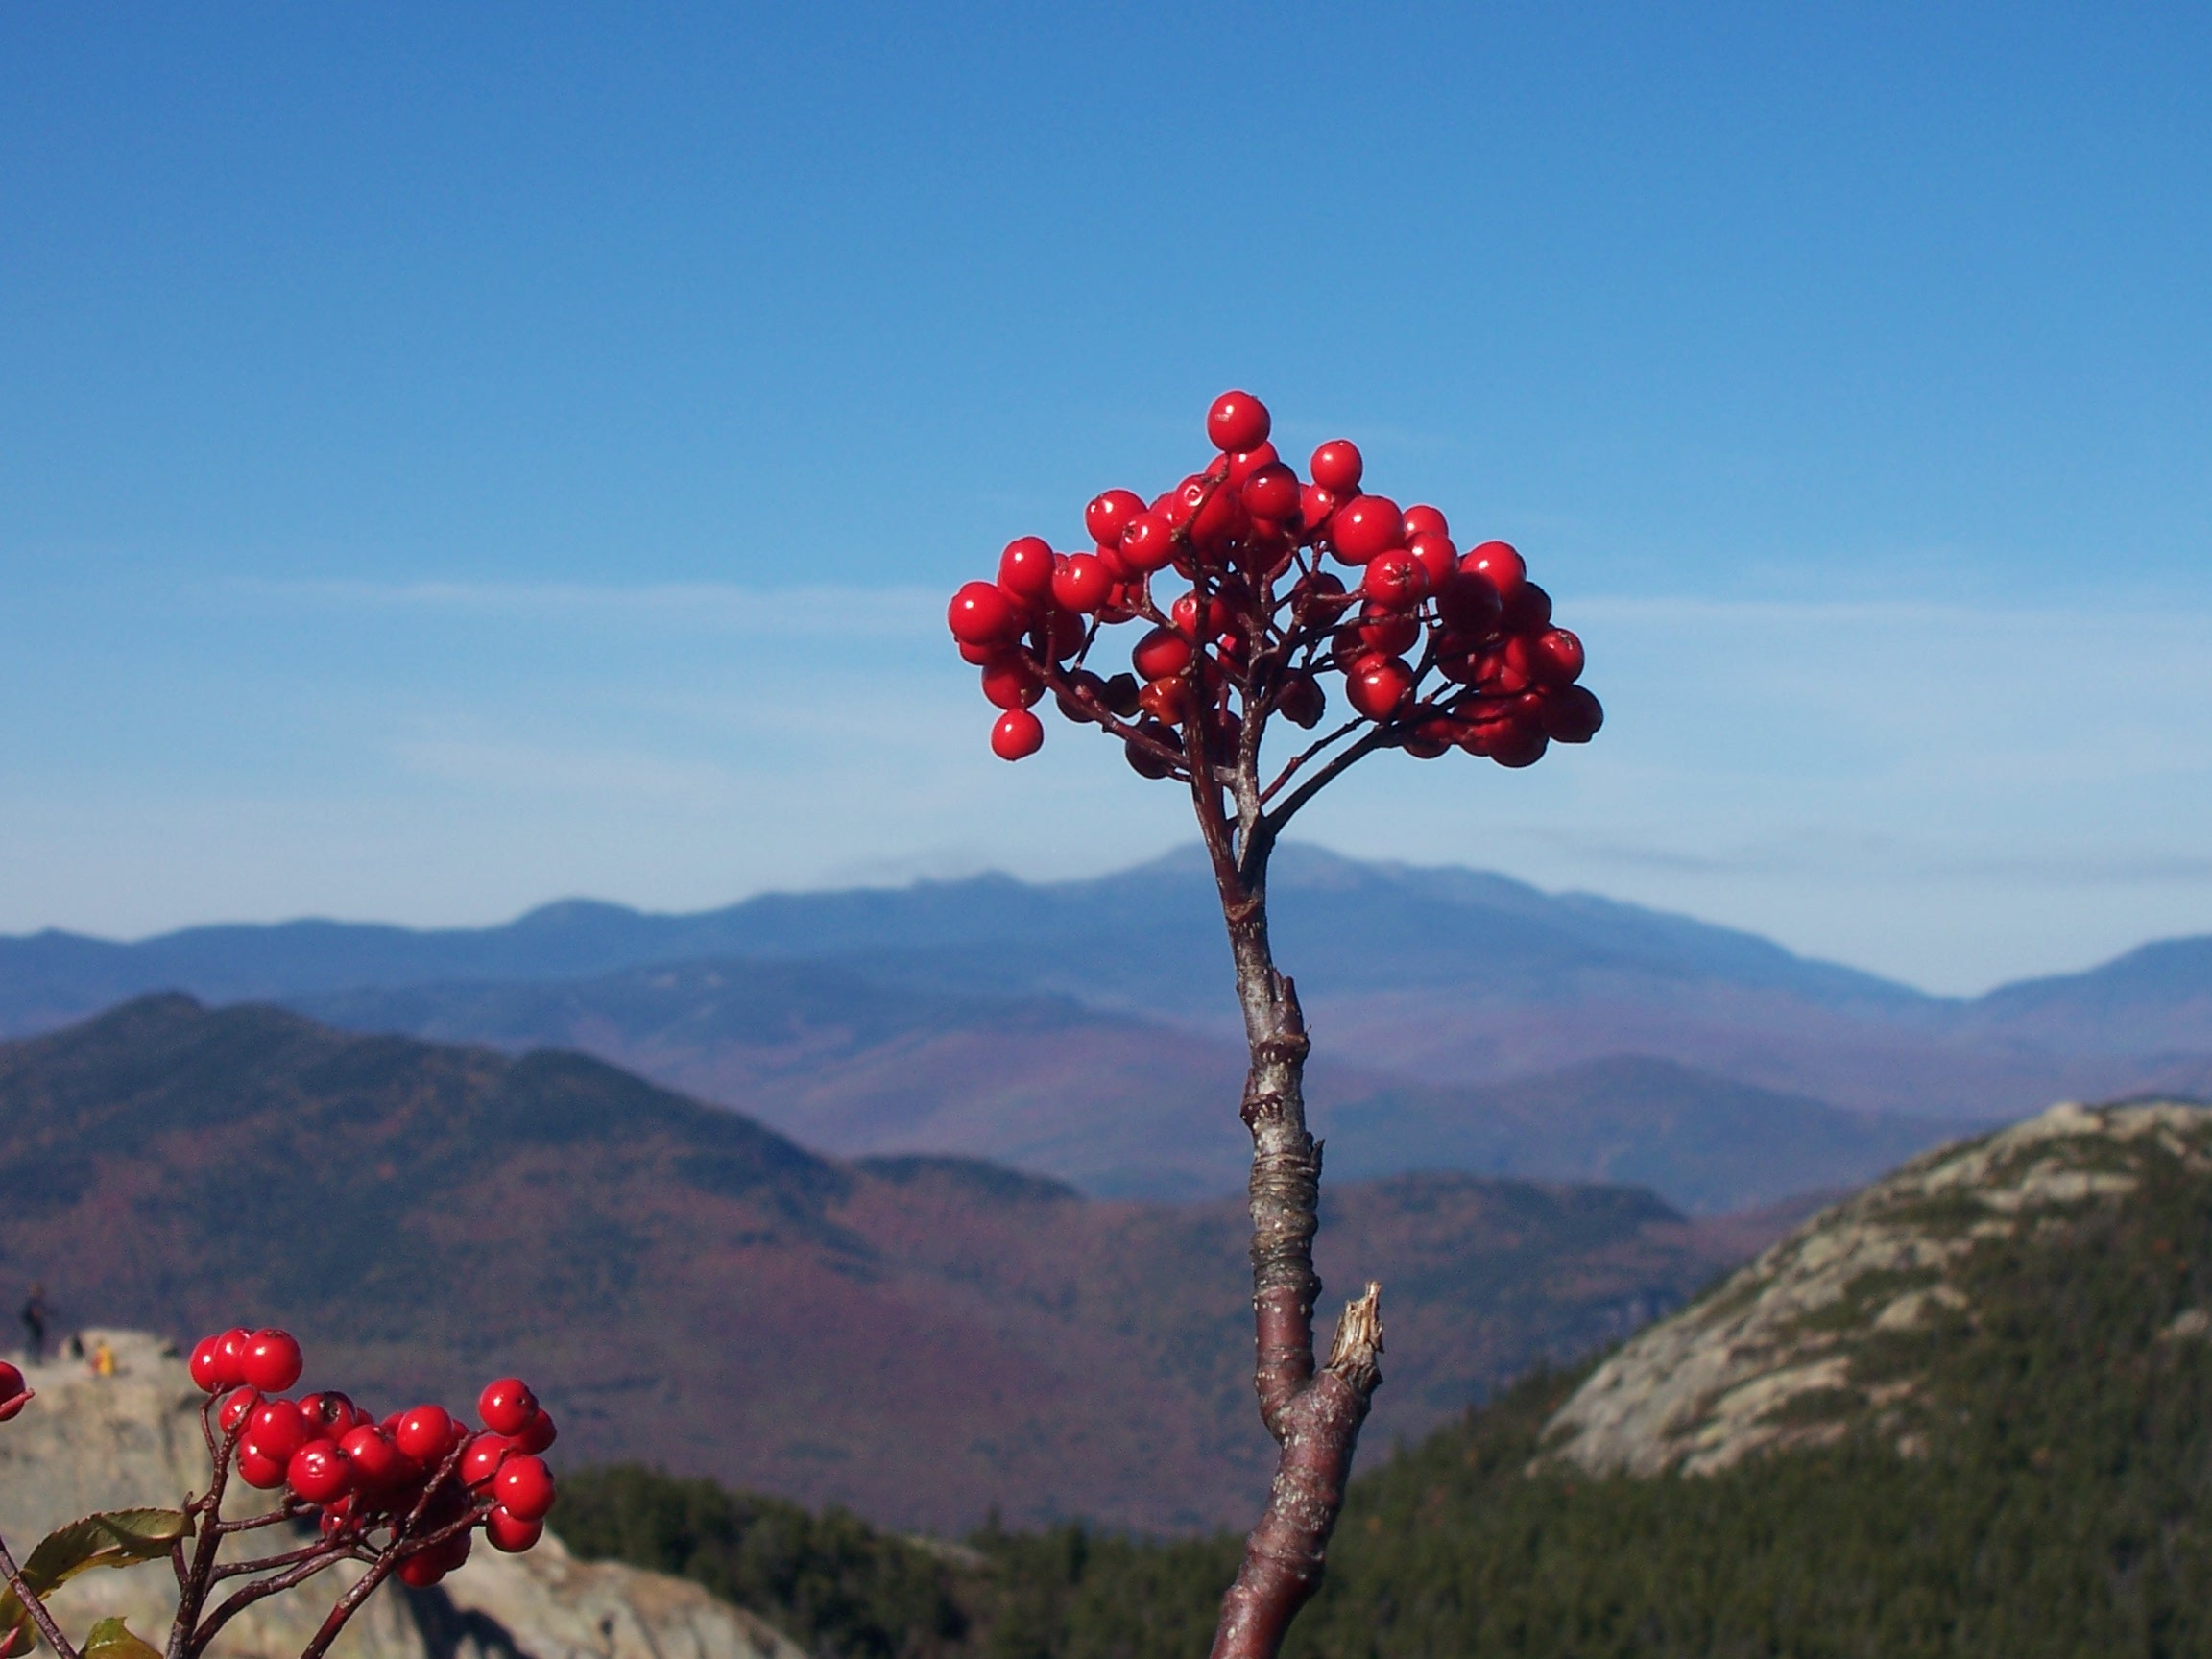 Berries at the Summit (user submitted)